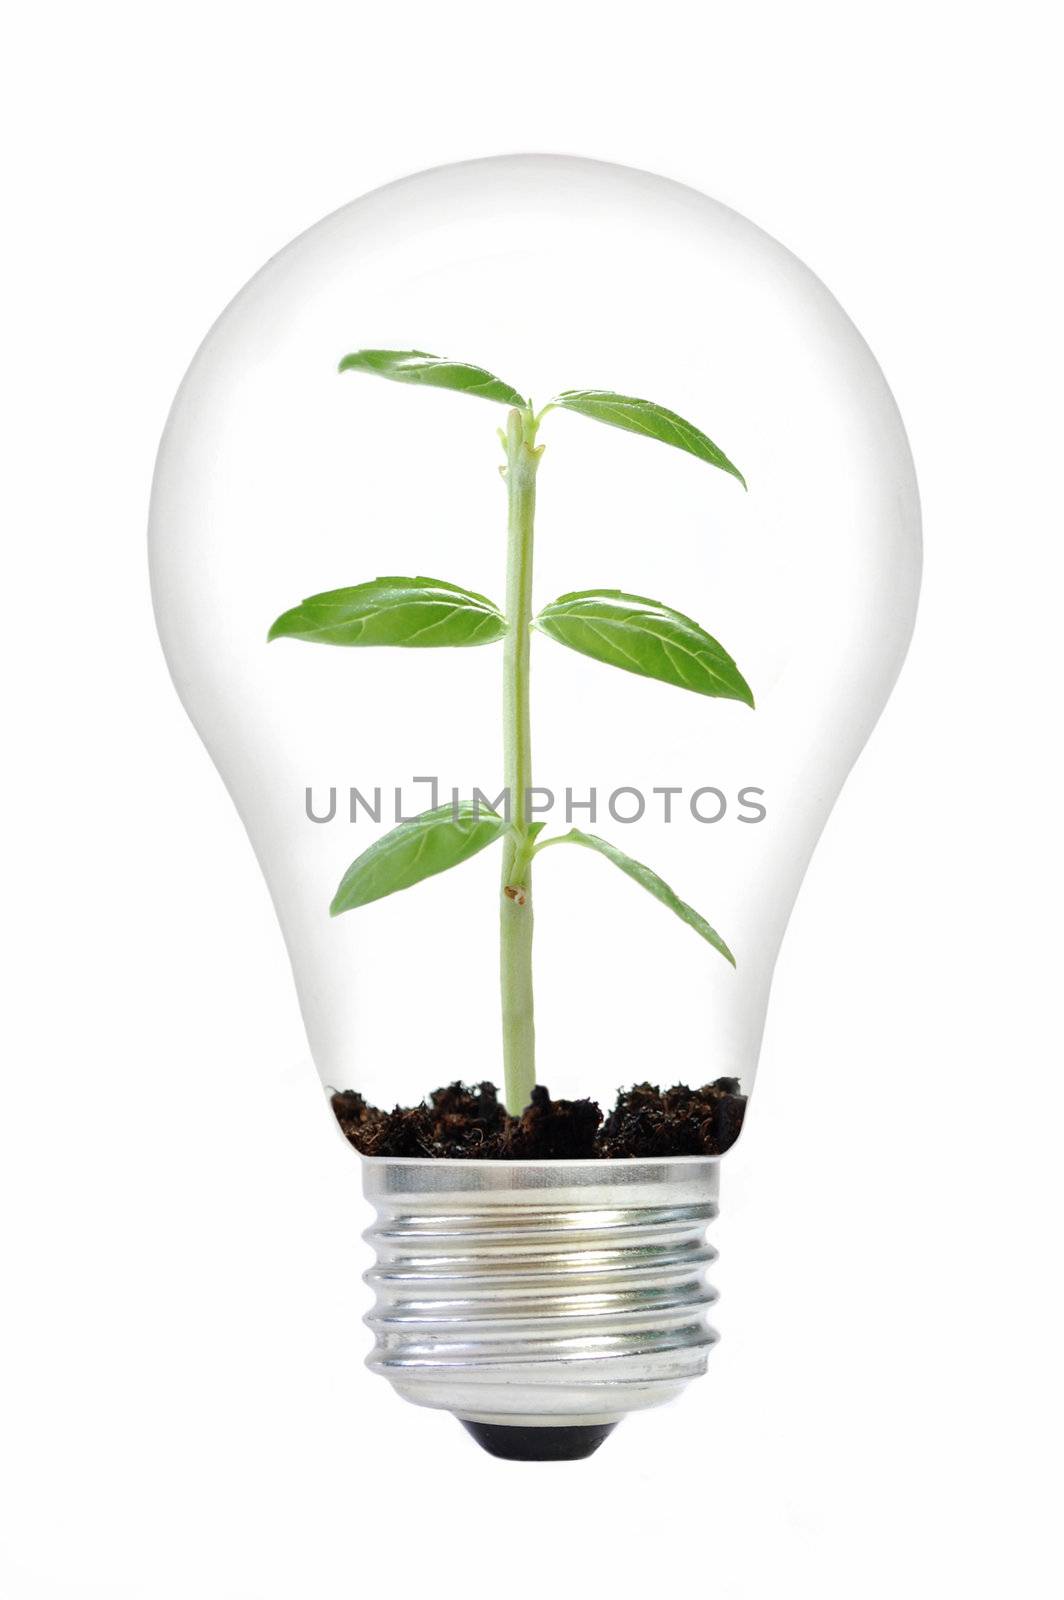 Green plant with soil in a light bulb